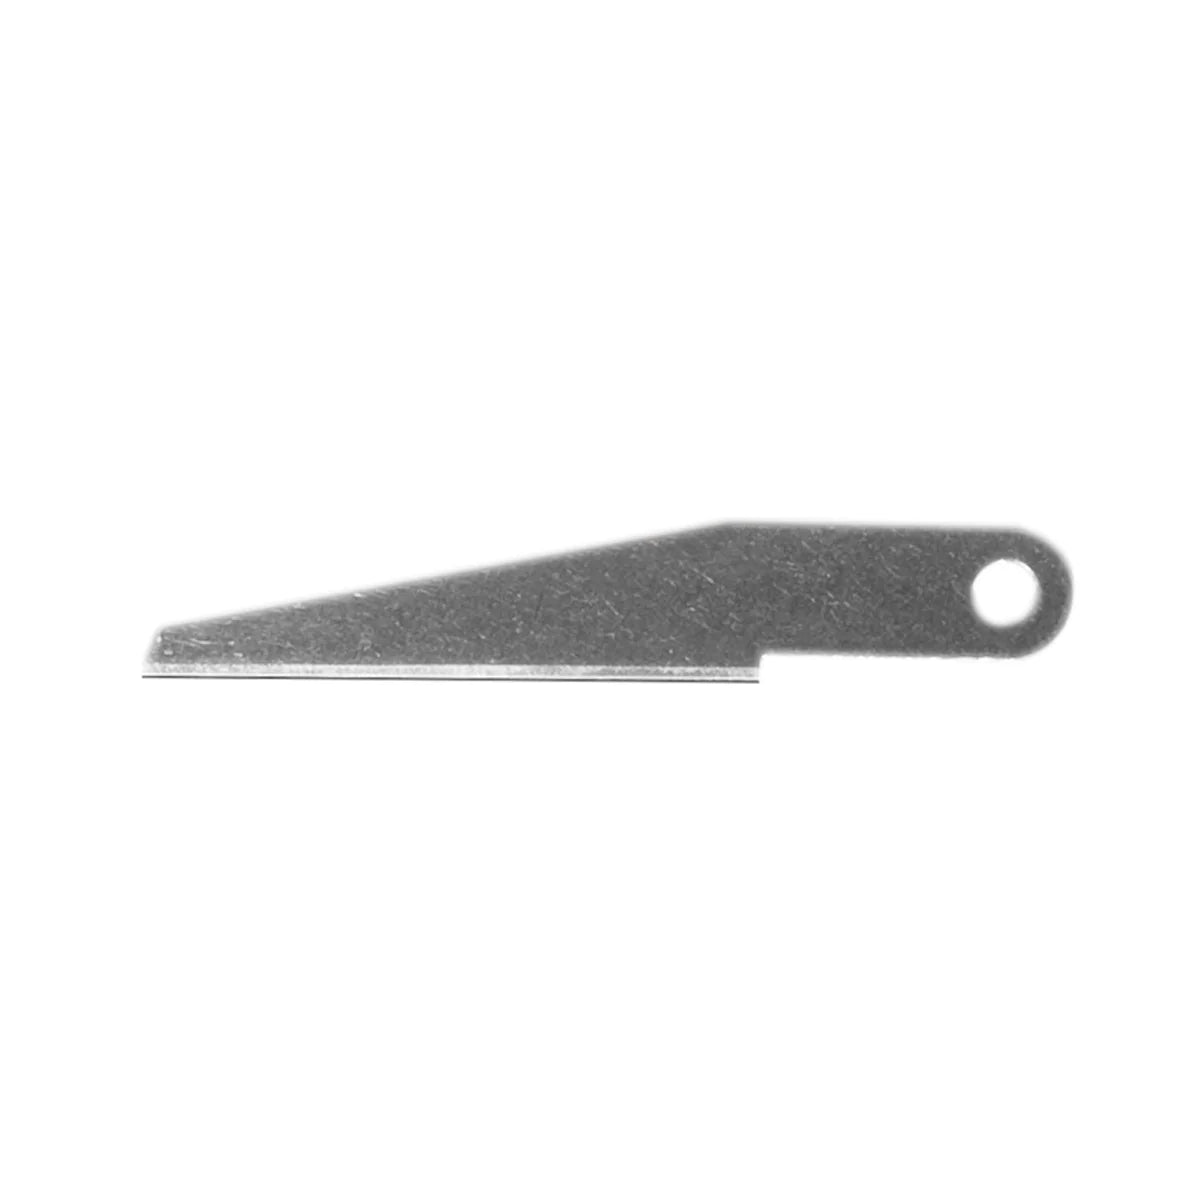 Excel 20101 NO. 101 Straight Edge Carving Blade (2pcs) Excel TOOLS